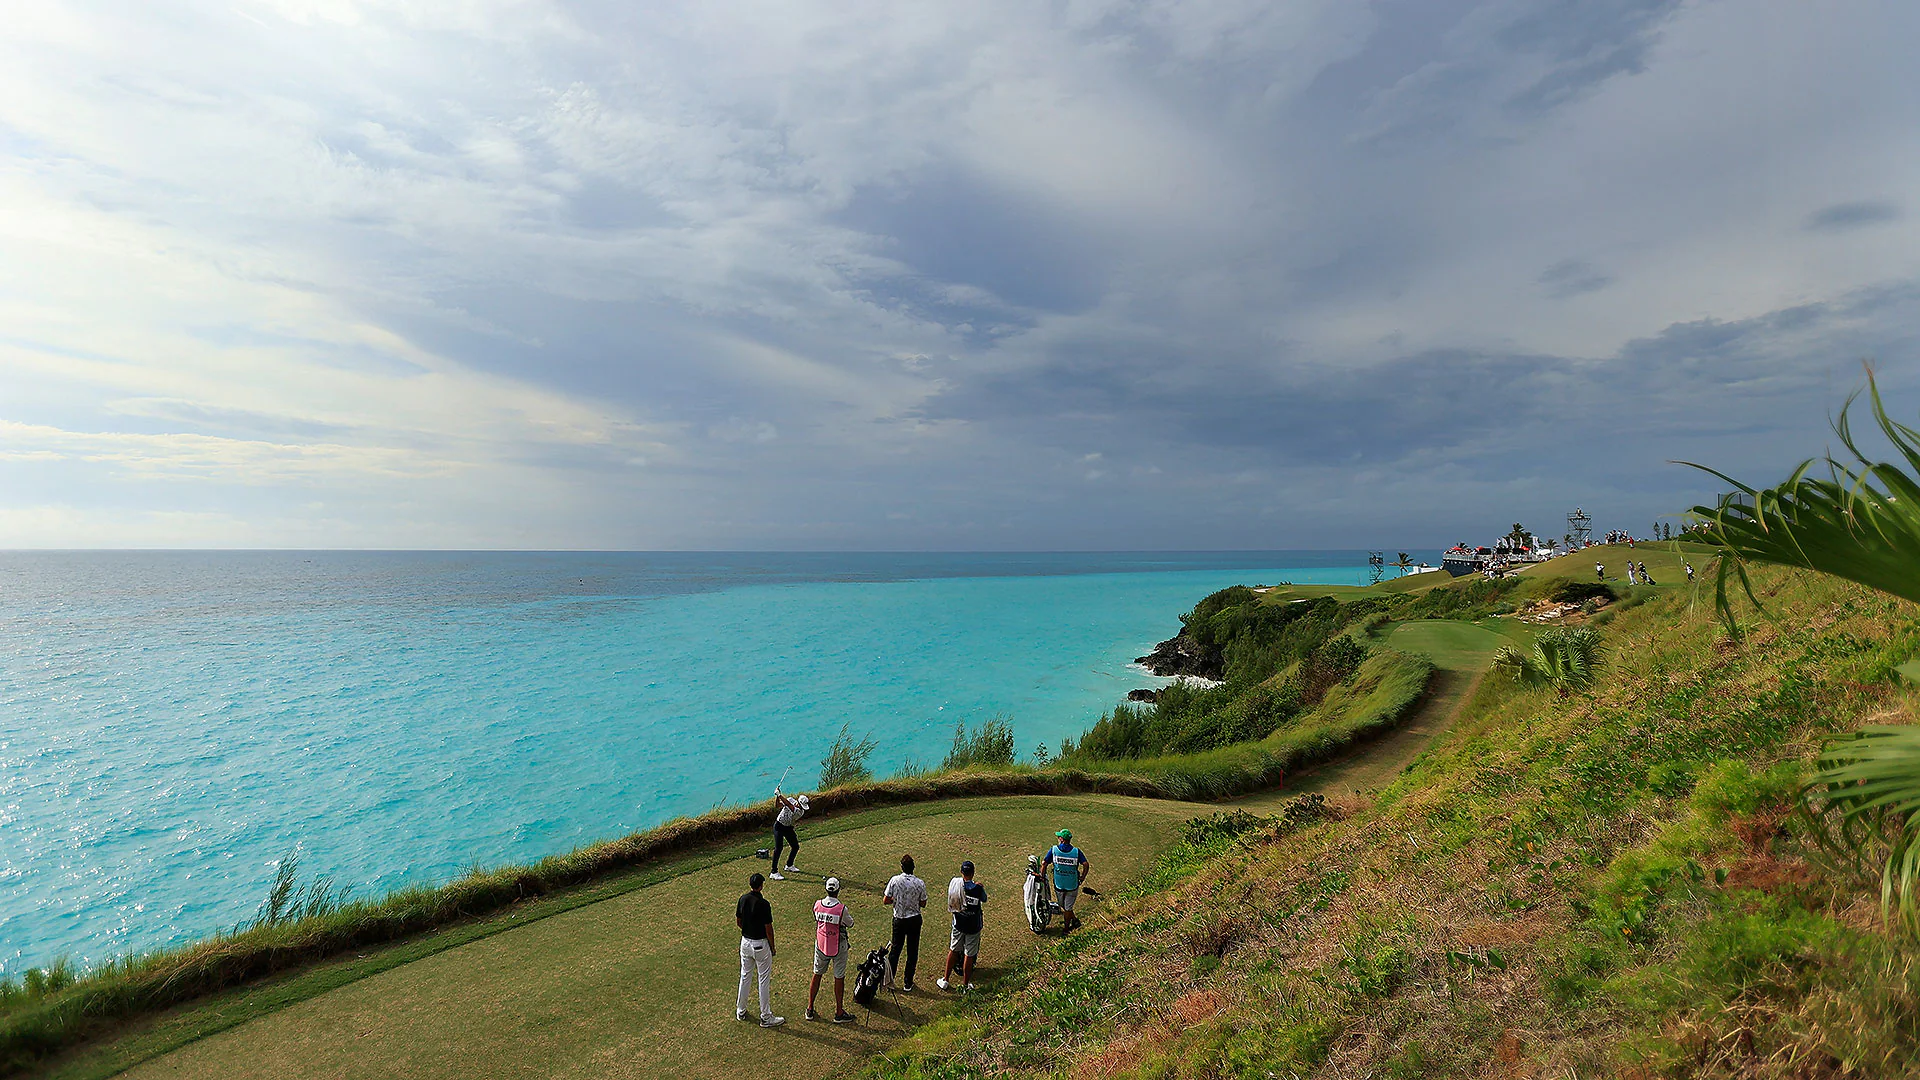 Bermuda Championship tee times moved up as big storm looms on Sunday